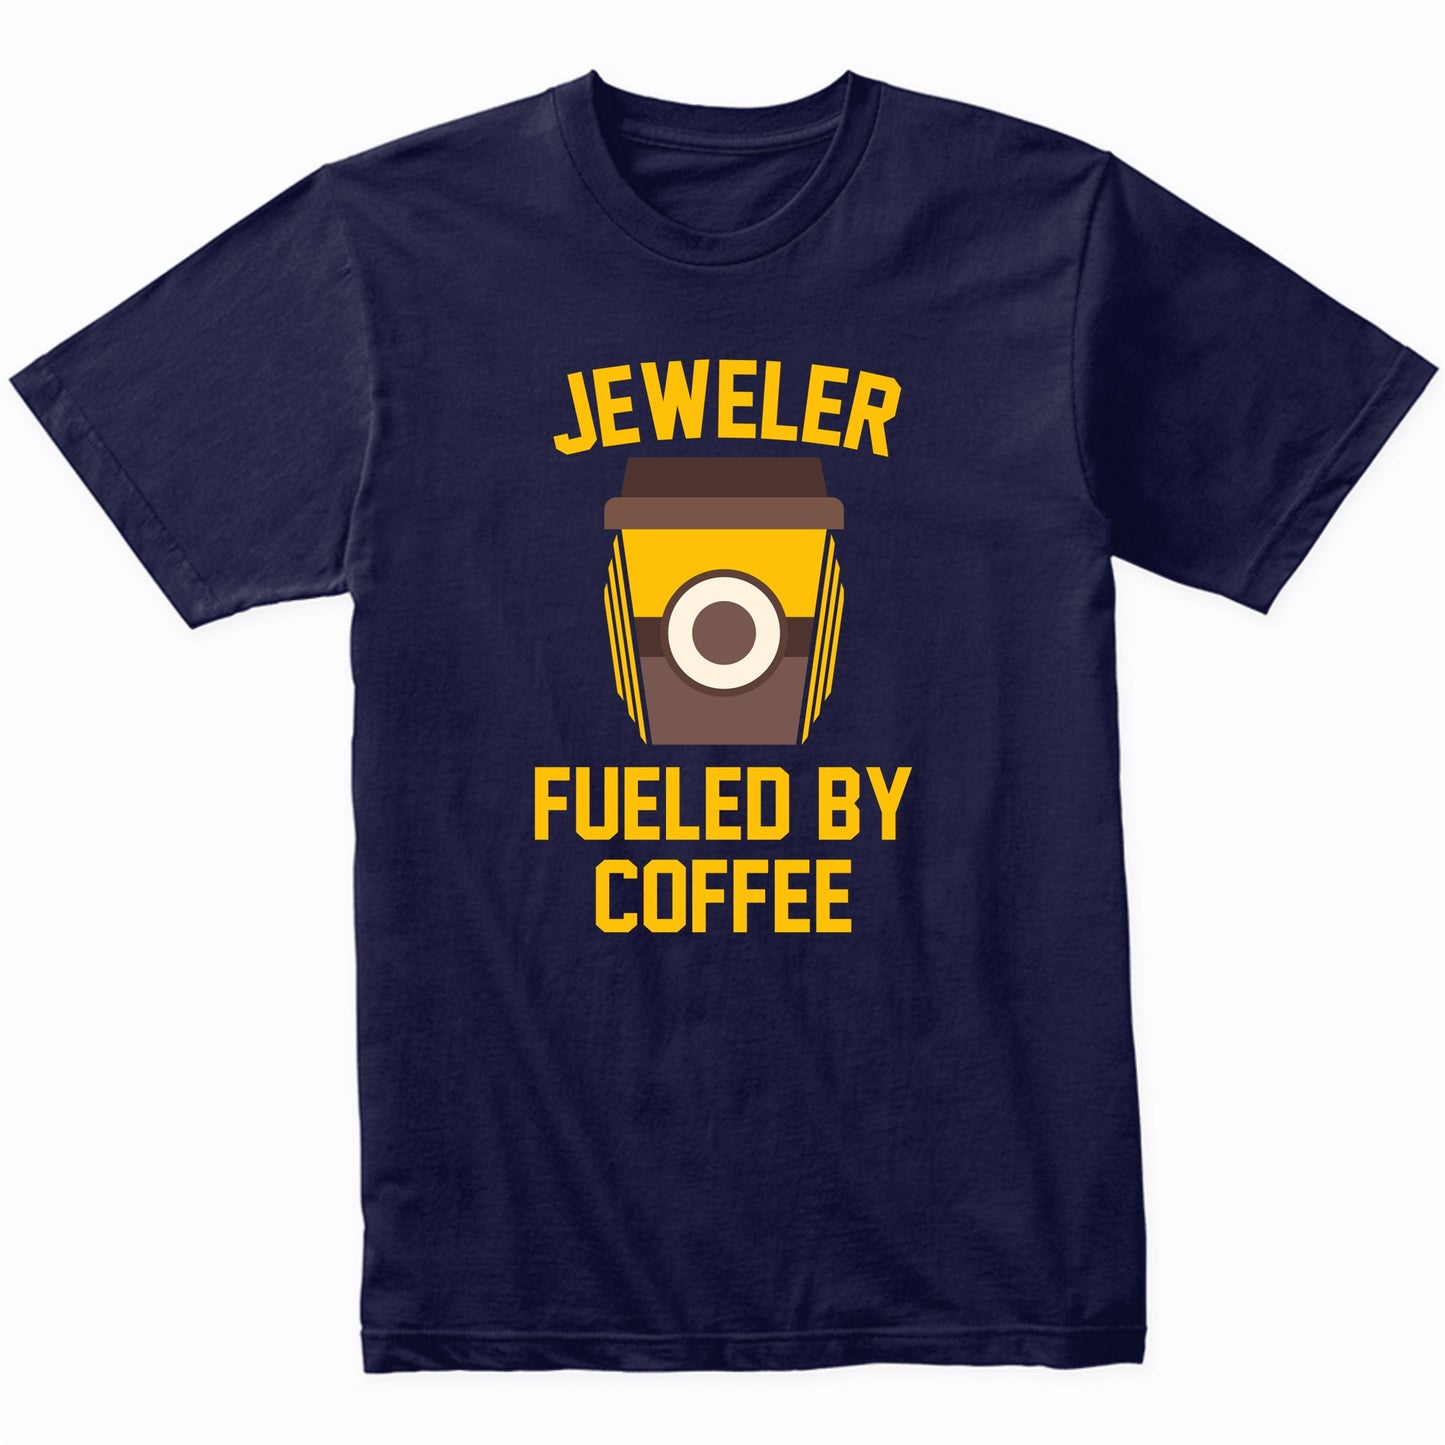 Jeweler Fueled By Coffee Funny Shirt